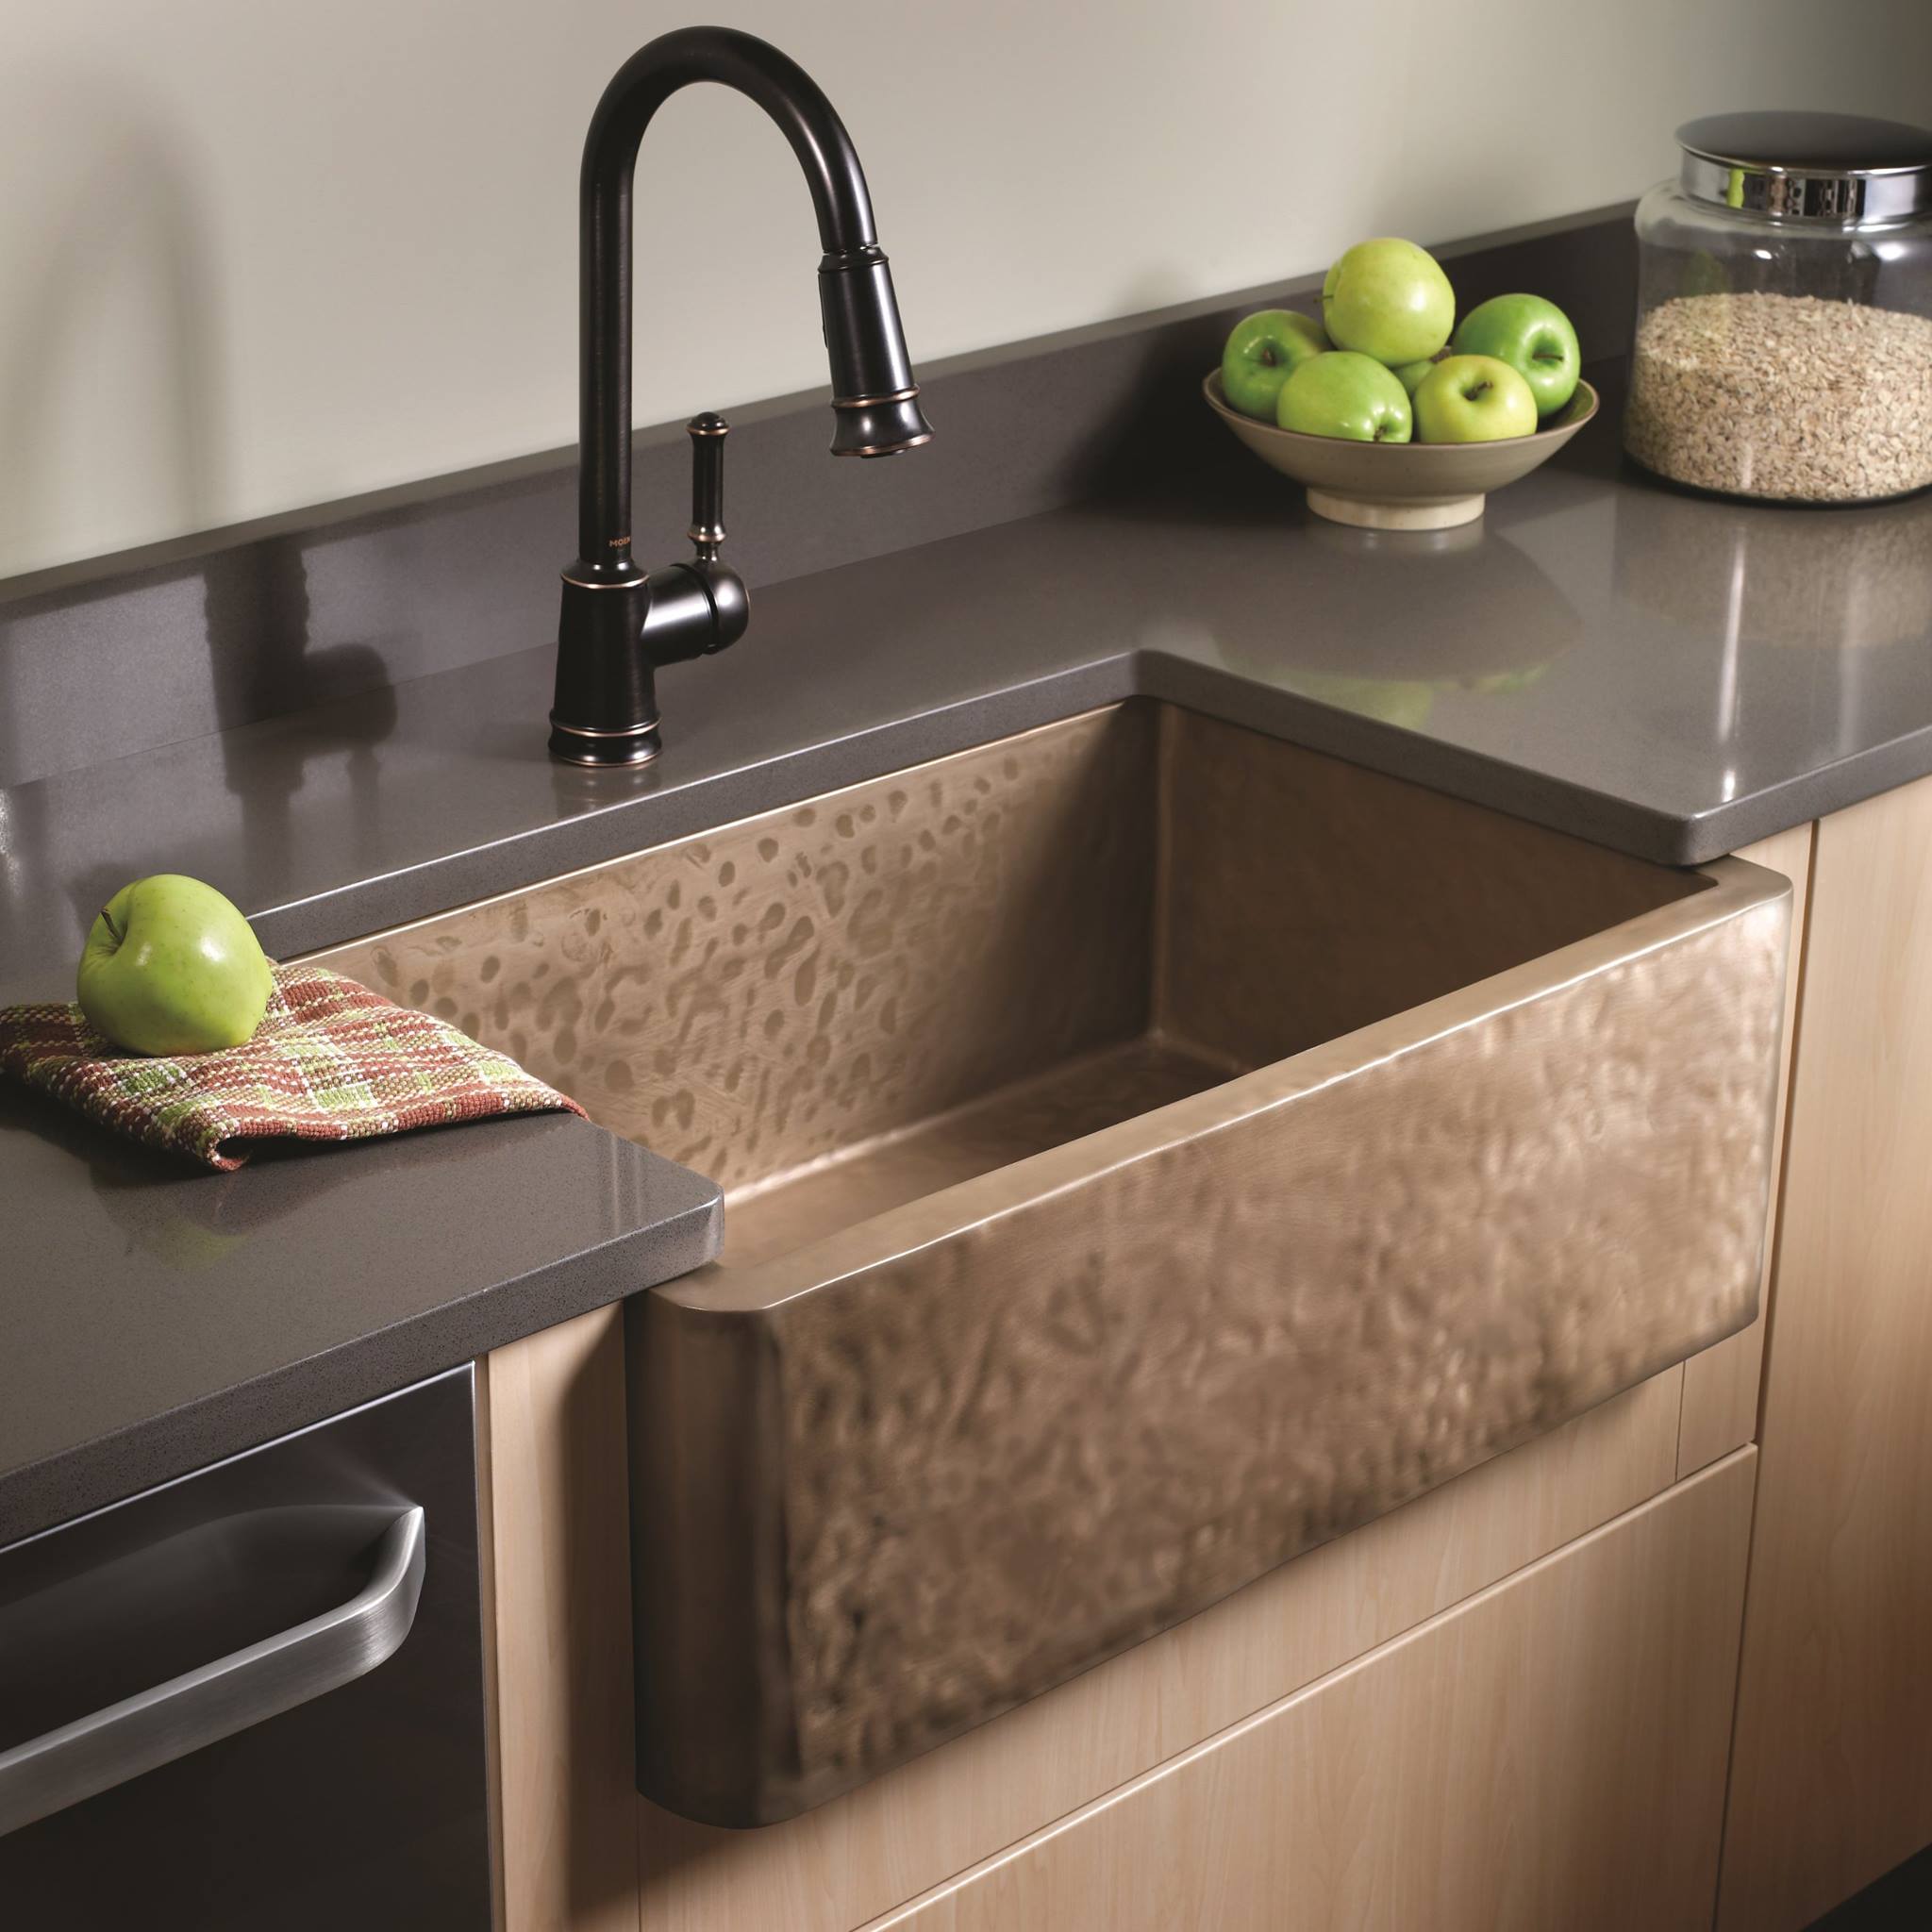 Alno Inc sink and faucet